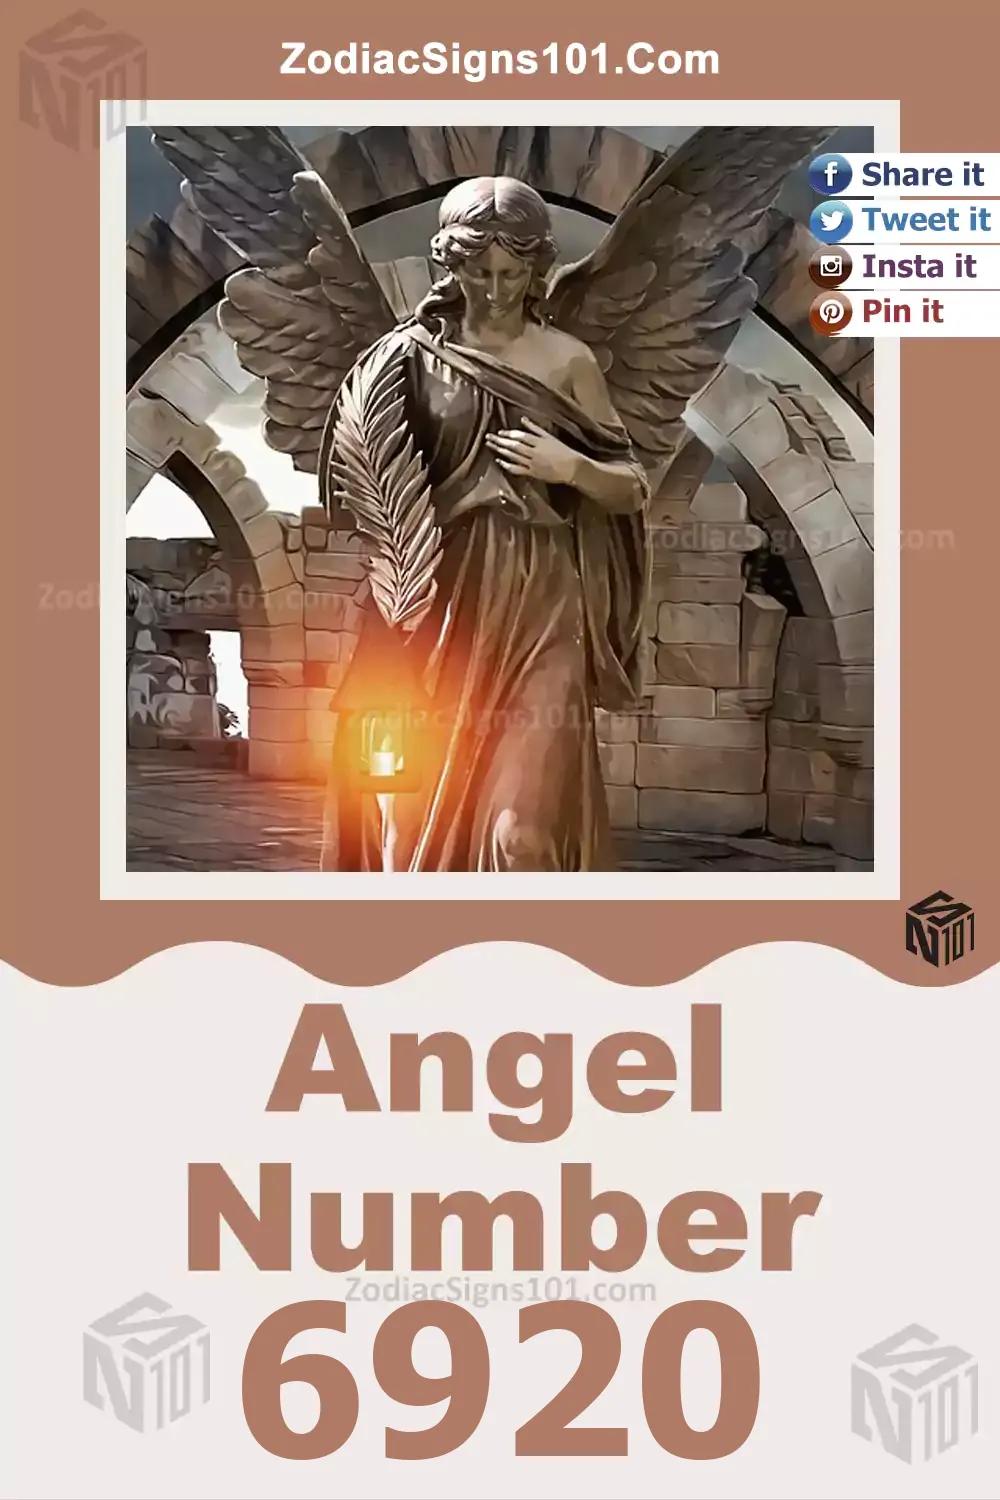 6920 Angel Number Meaning